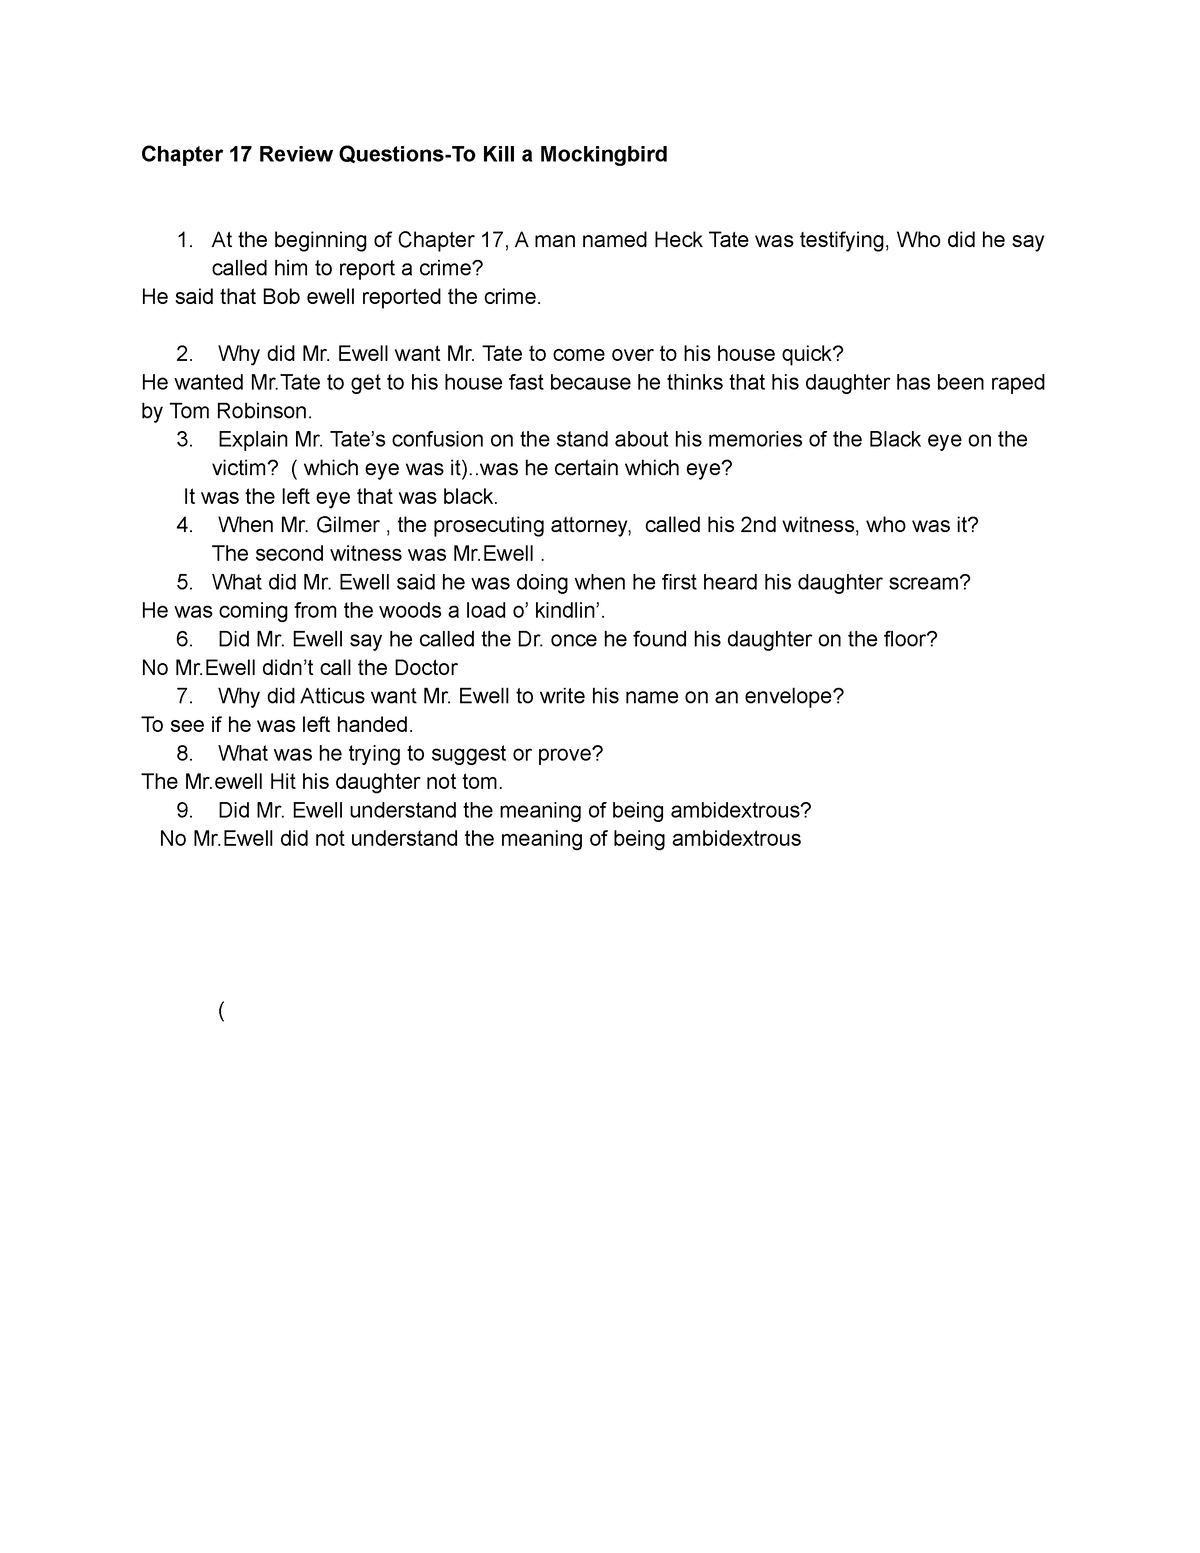 assignment chapter 17 questions for further study